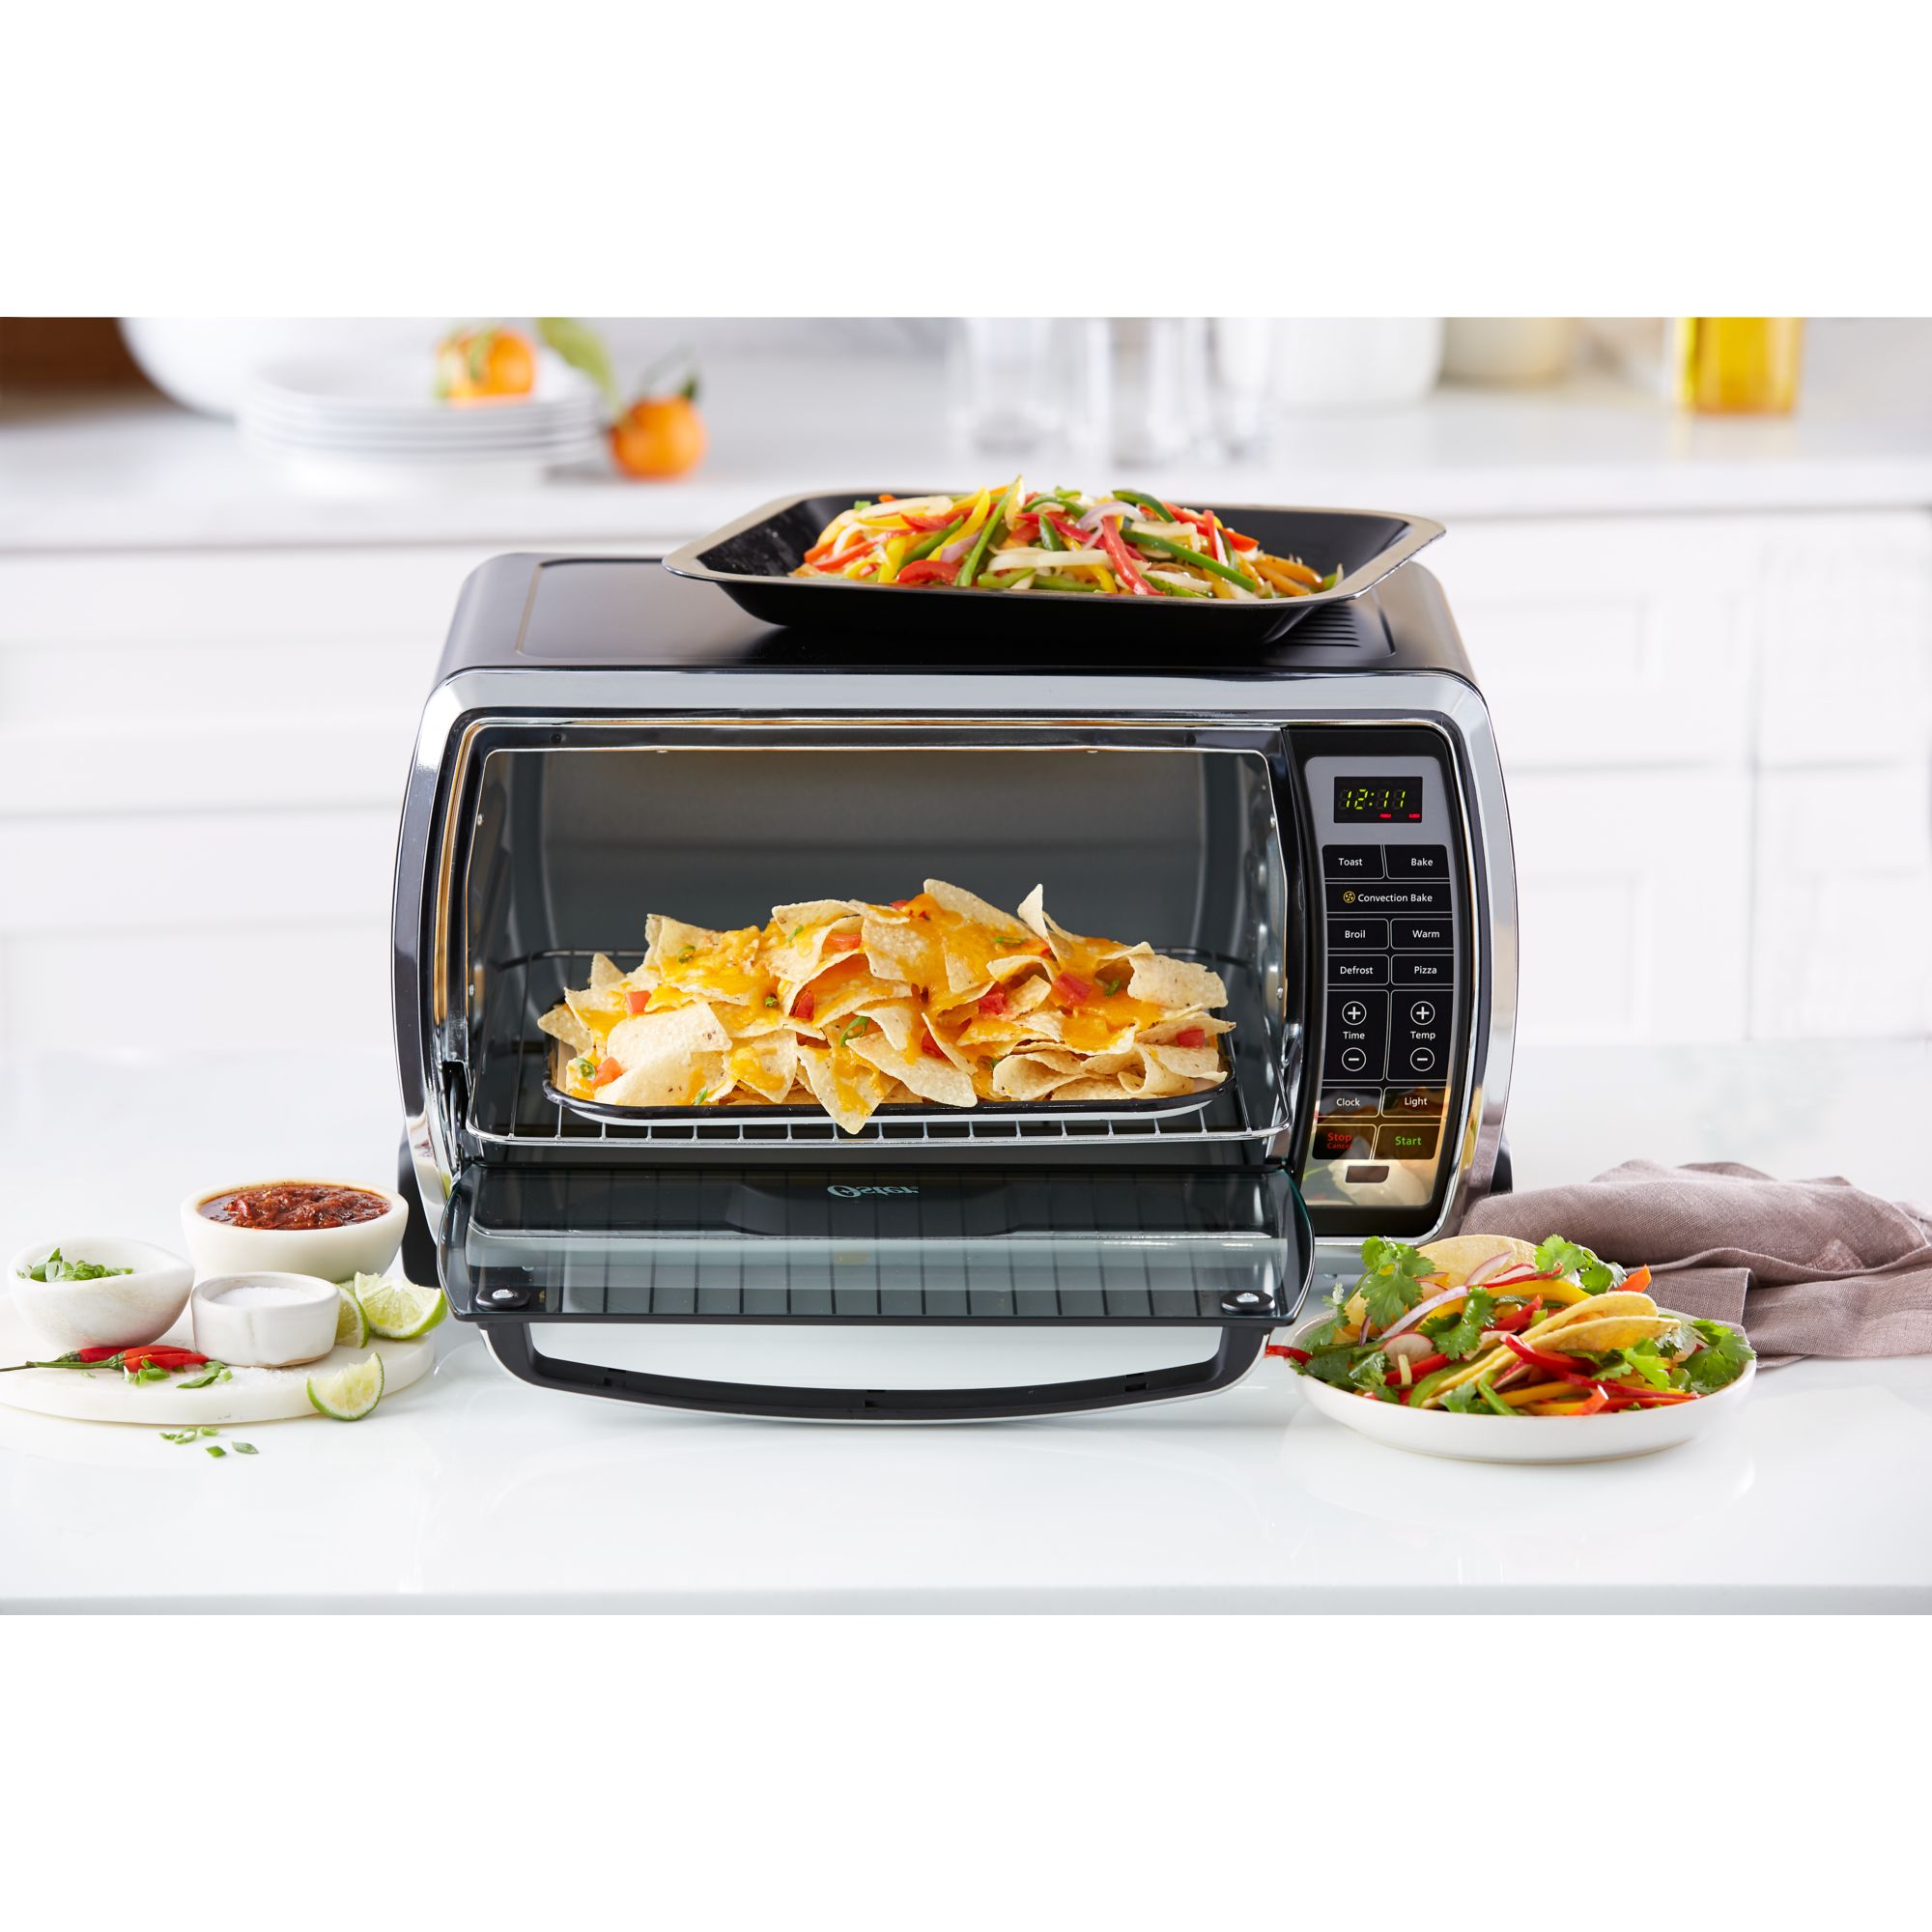 Oster Large Digital Countertop Oven - Brushed Stainless Steel